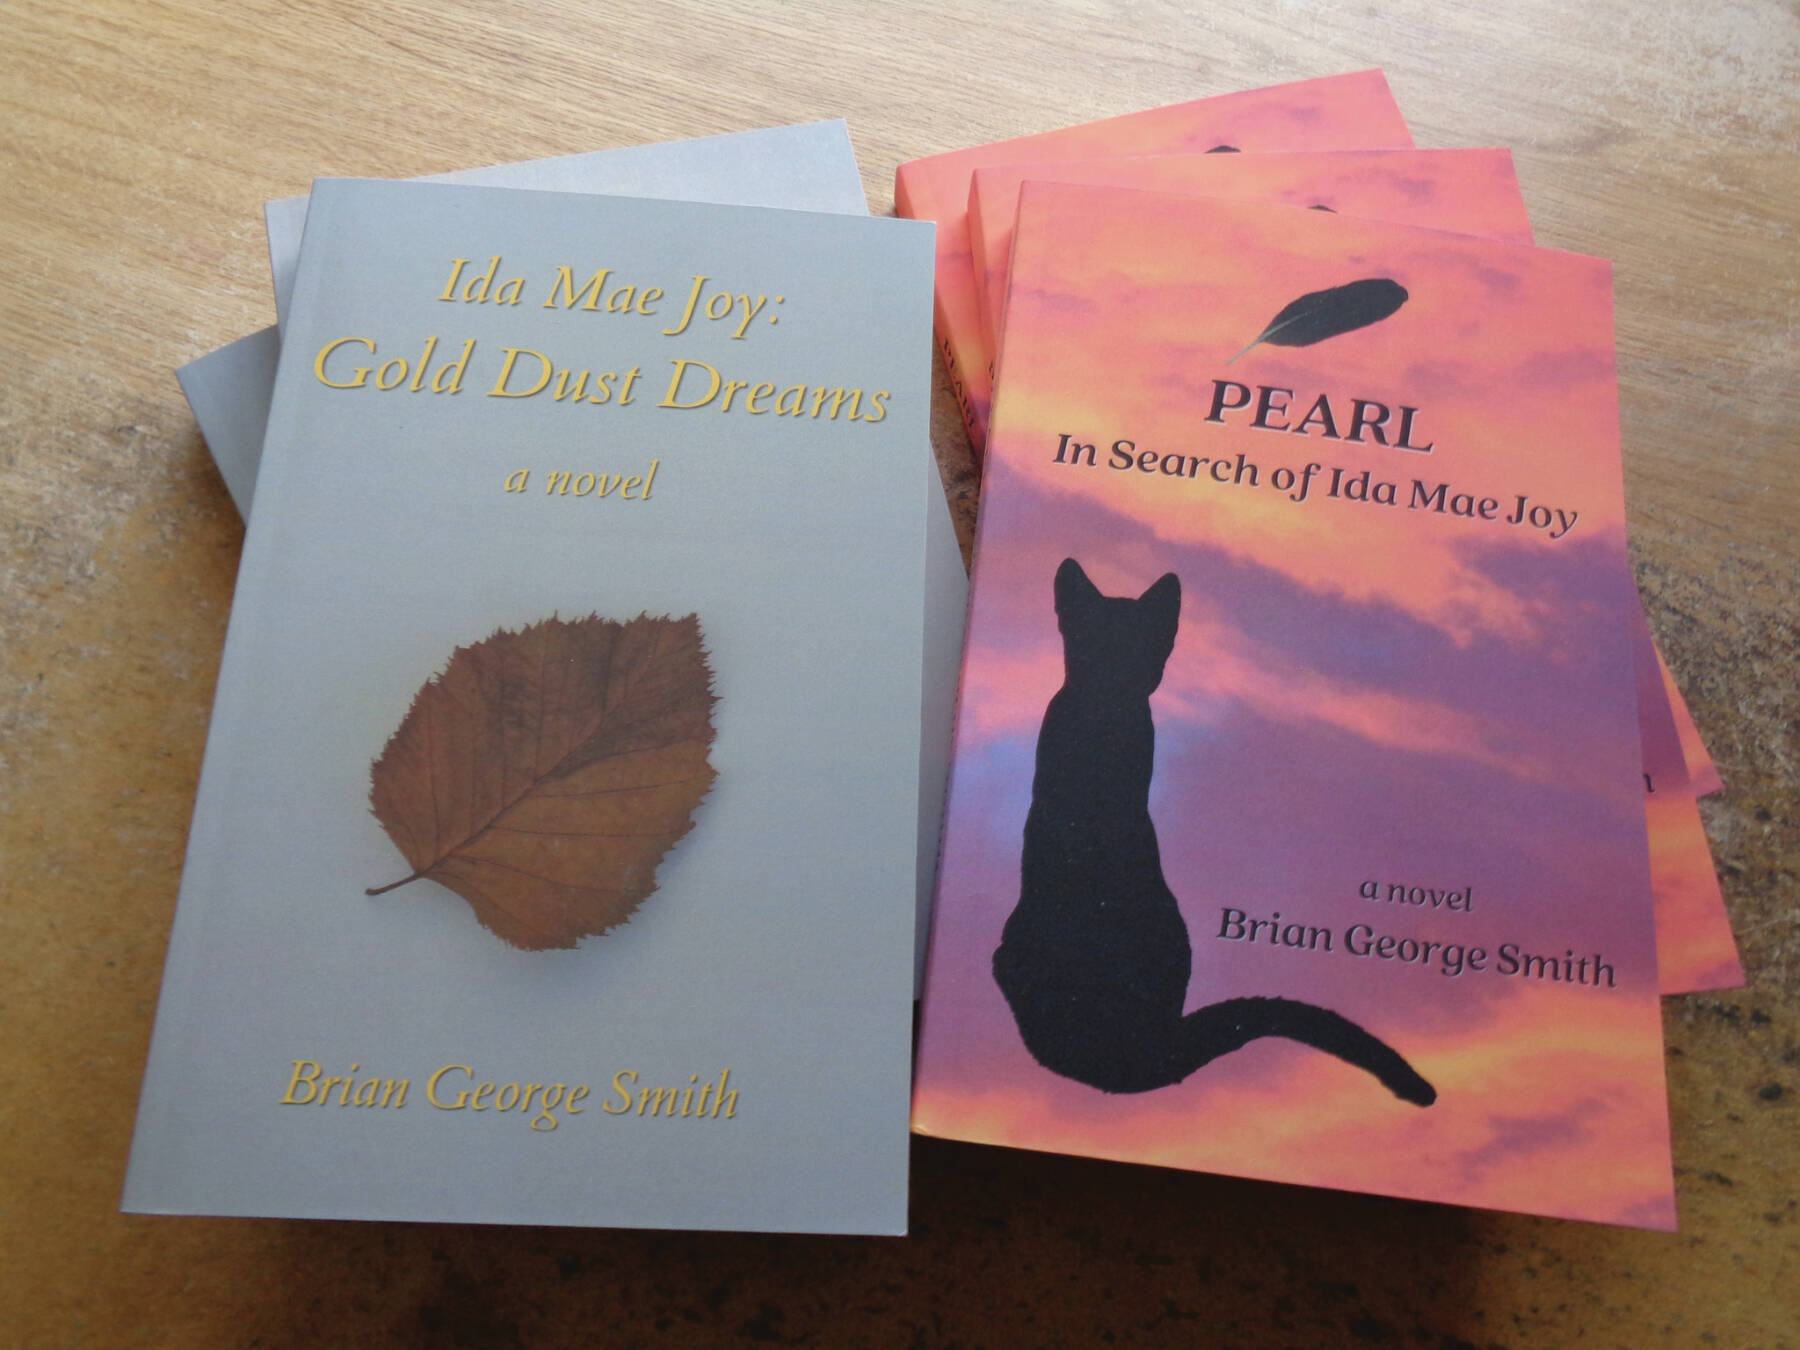 Photo provided by the author
“Ida May Joy” and its sequel, “Pearl,” by Brian George Smith, pictured here, were published in 2021 and 2022 respectively.